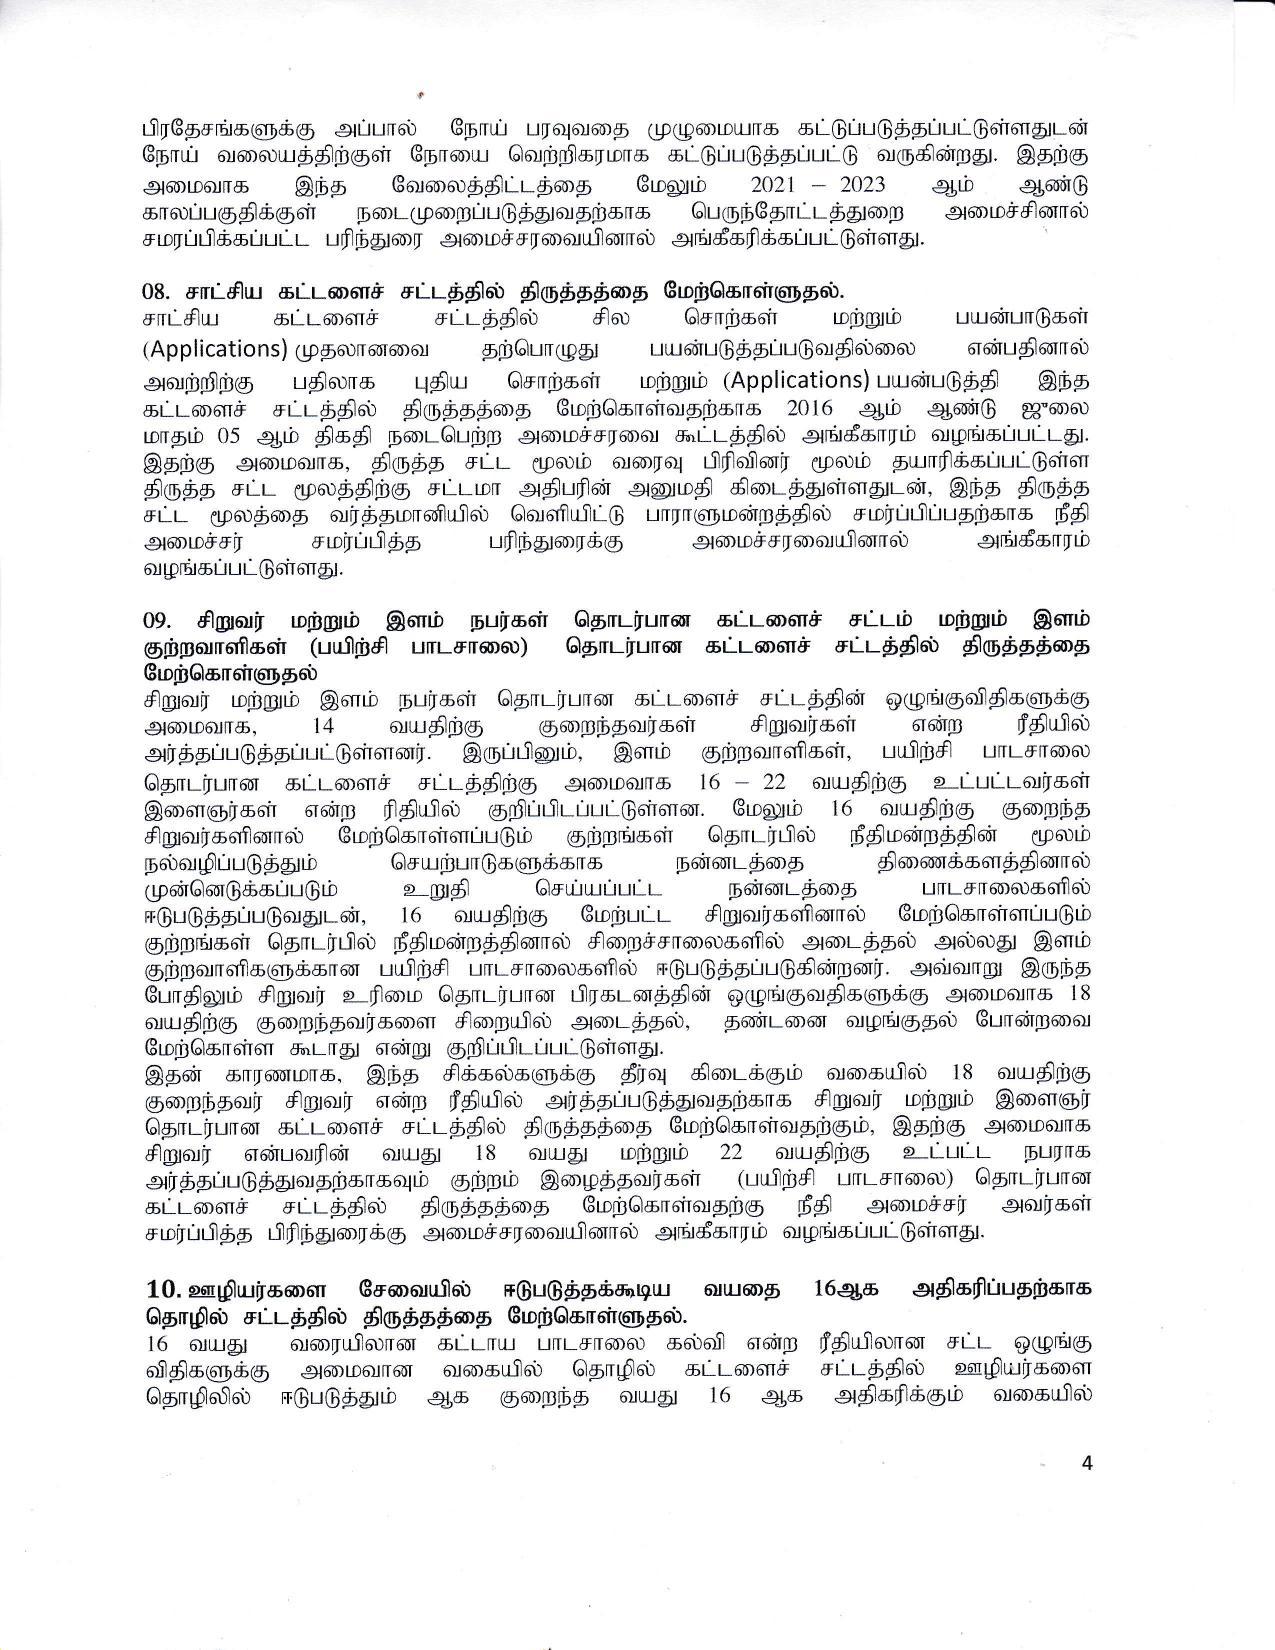 Cabinet Decision on 16.09.2020 0 Tamil 1 page 004